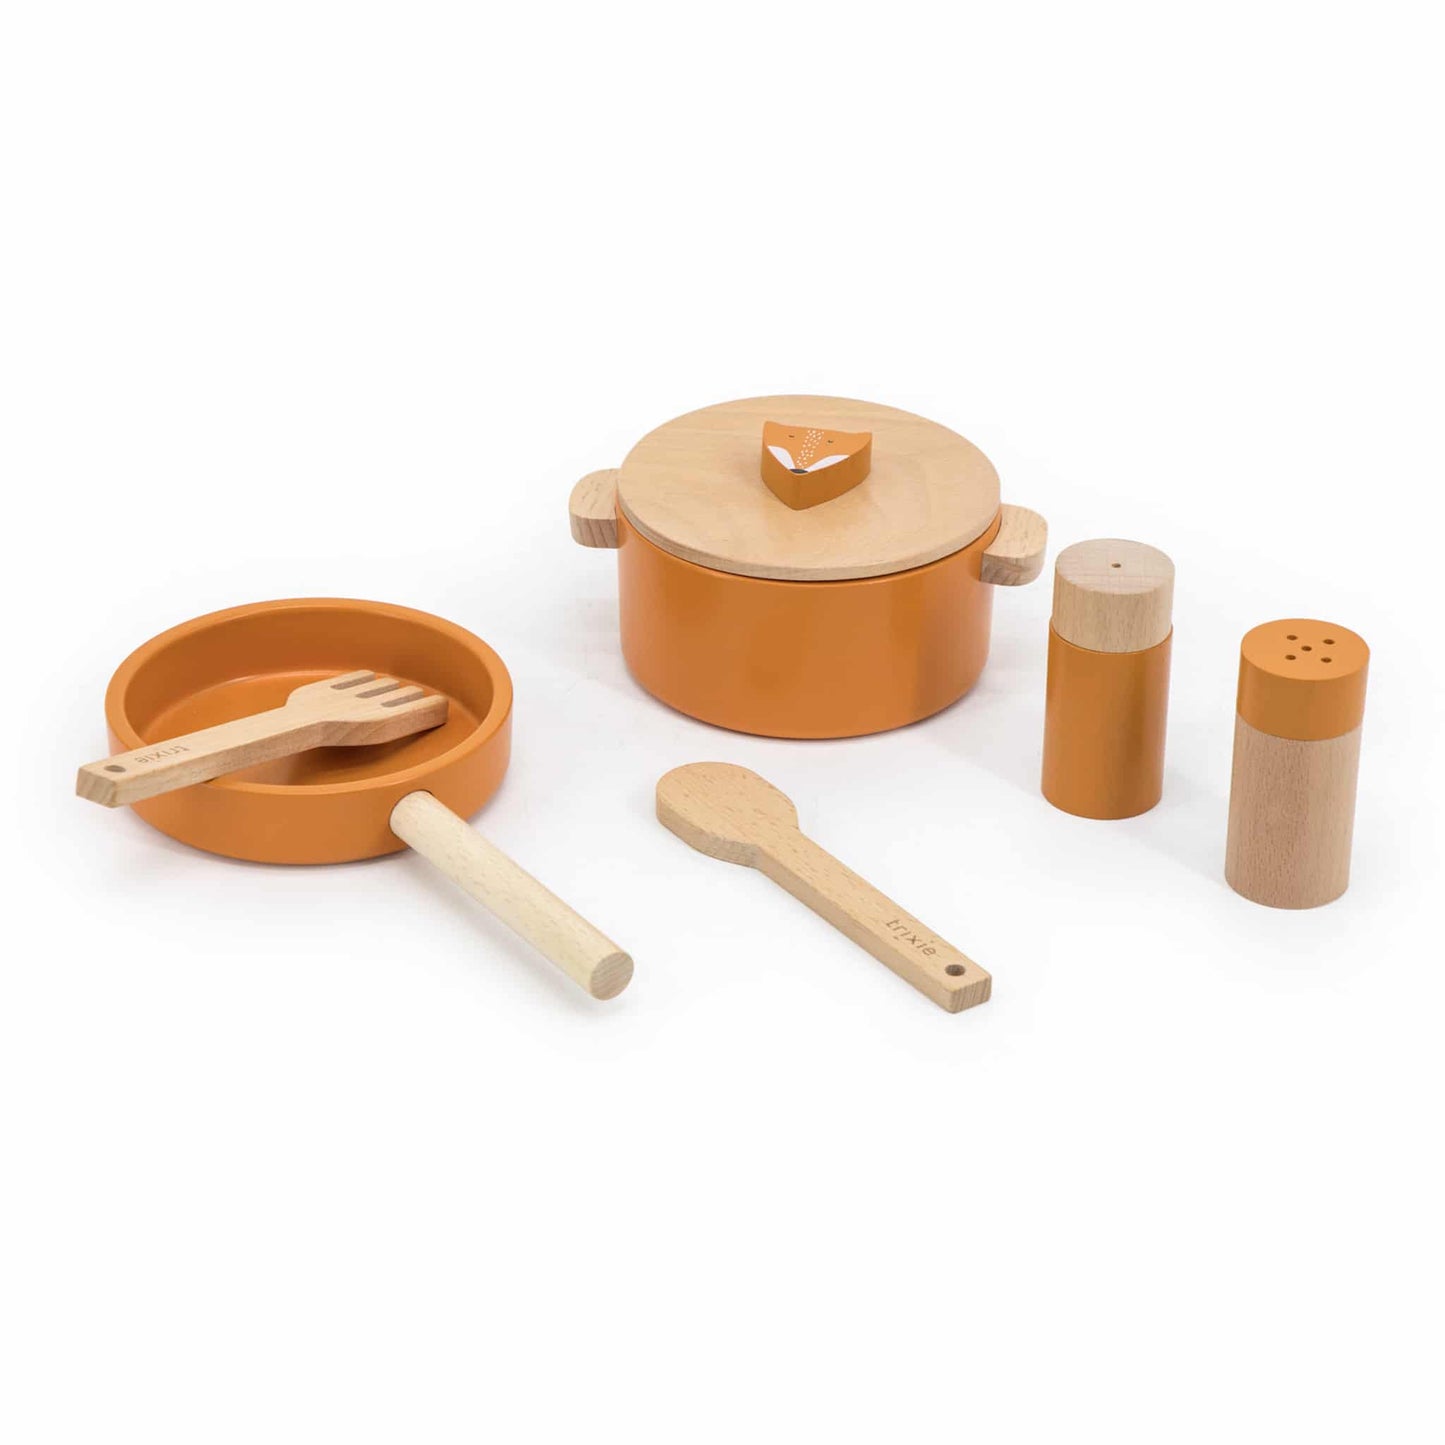 Trixie Wooden Cooking Set Mr Fox